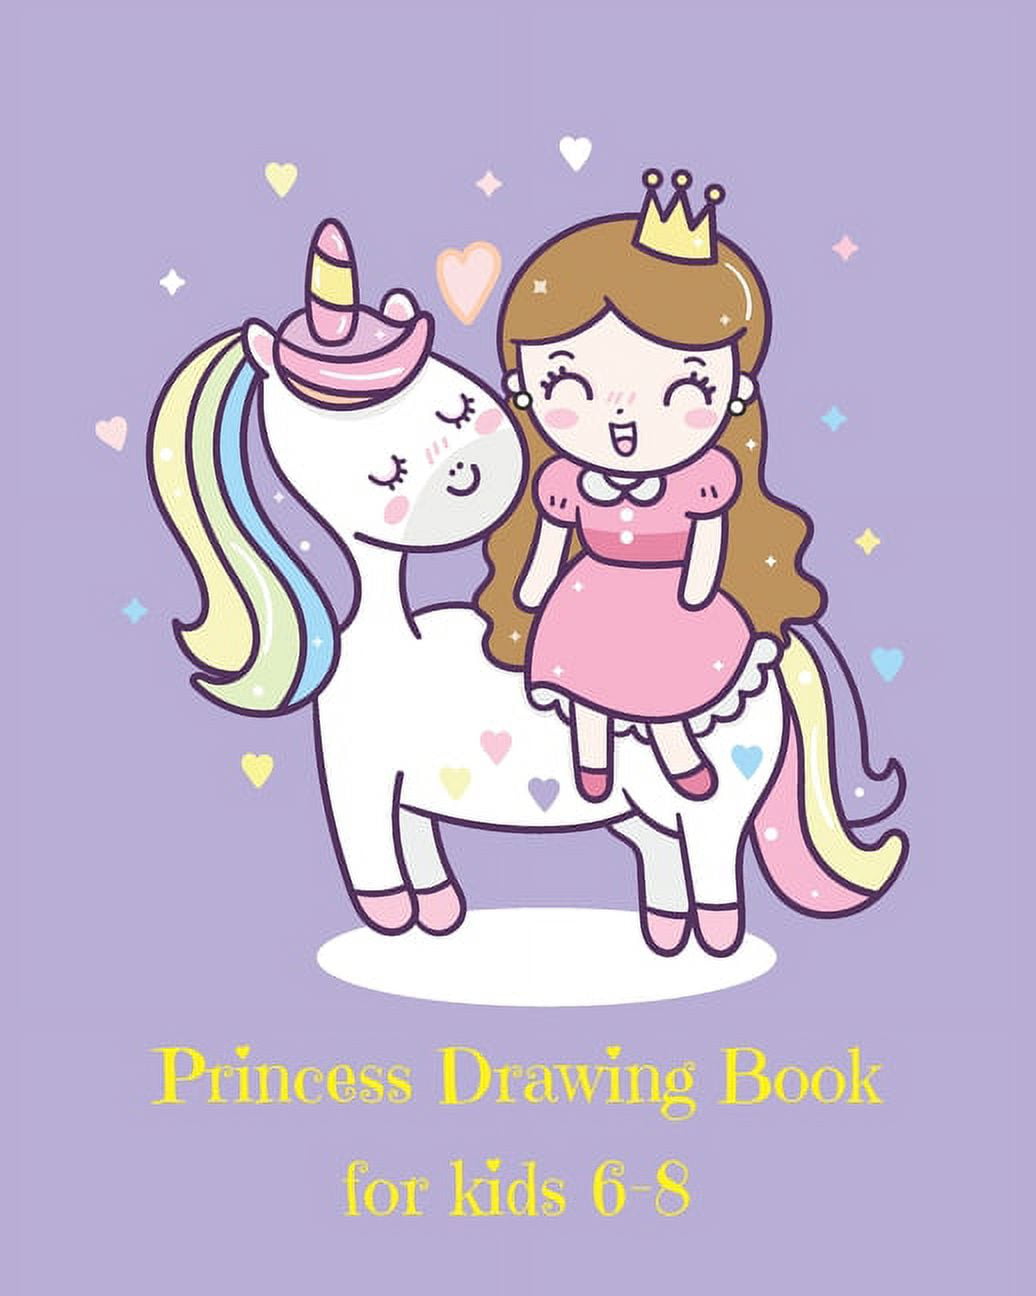 How to Draw Princess for Kids and Adults Graphic by Pro Designs